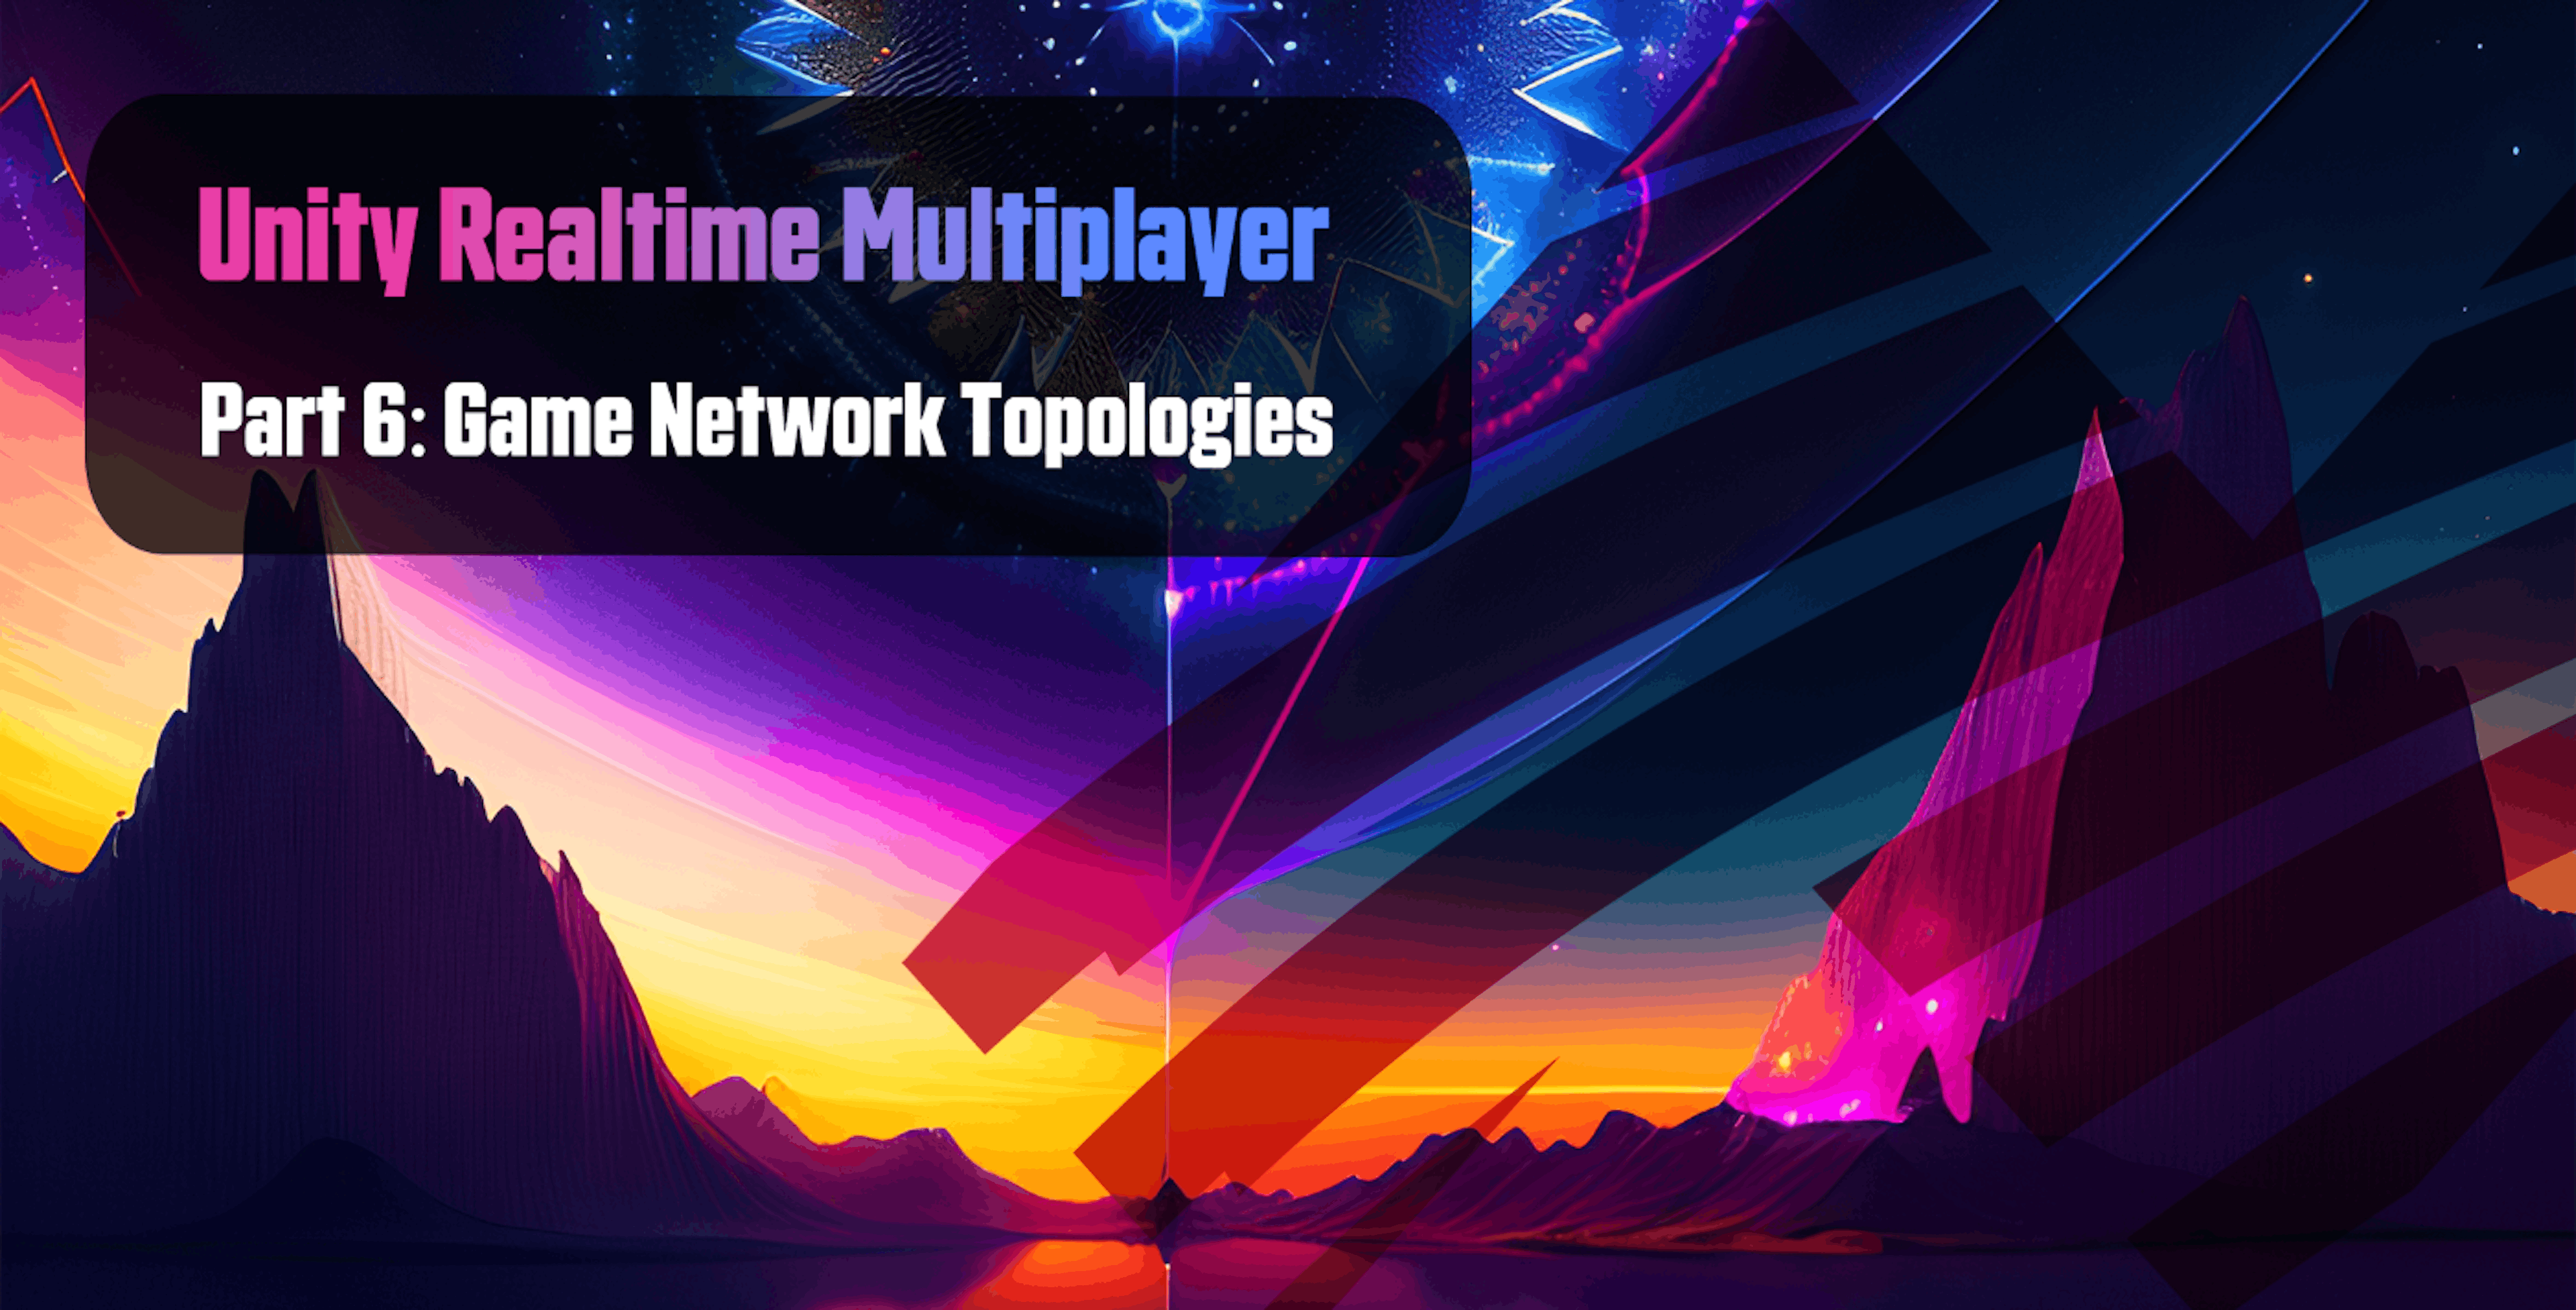 featured image - Unity Realtime Multiplayer, Part 6: Game Network Topologies